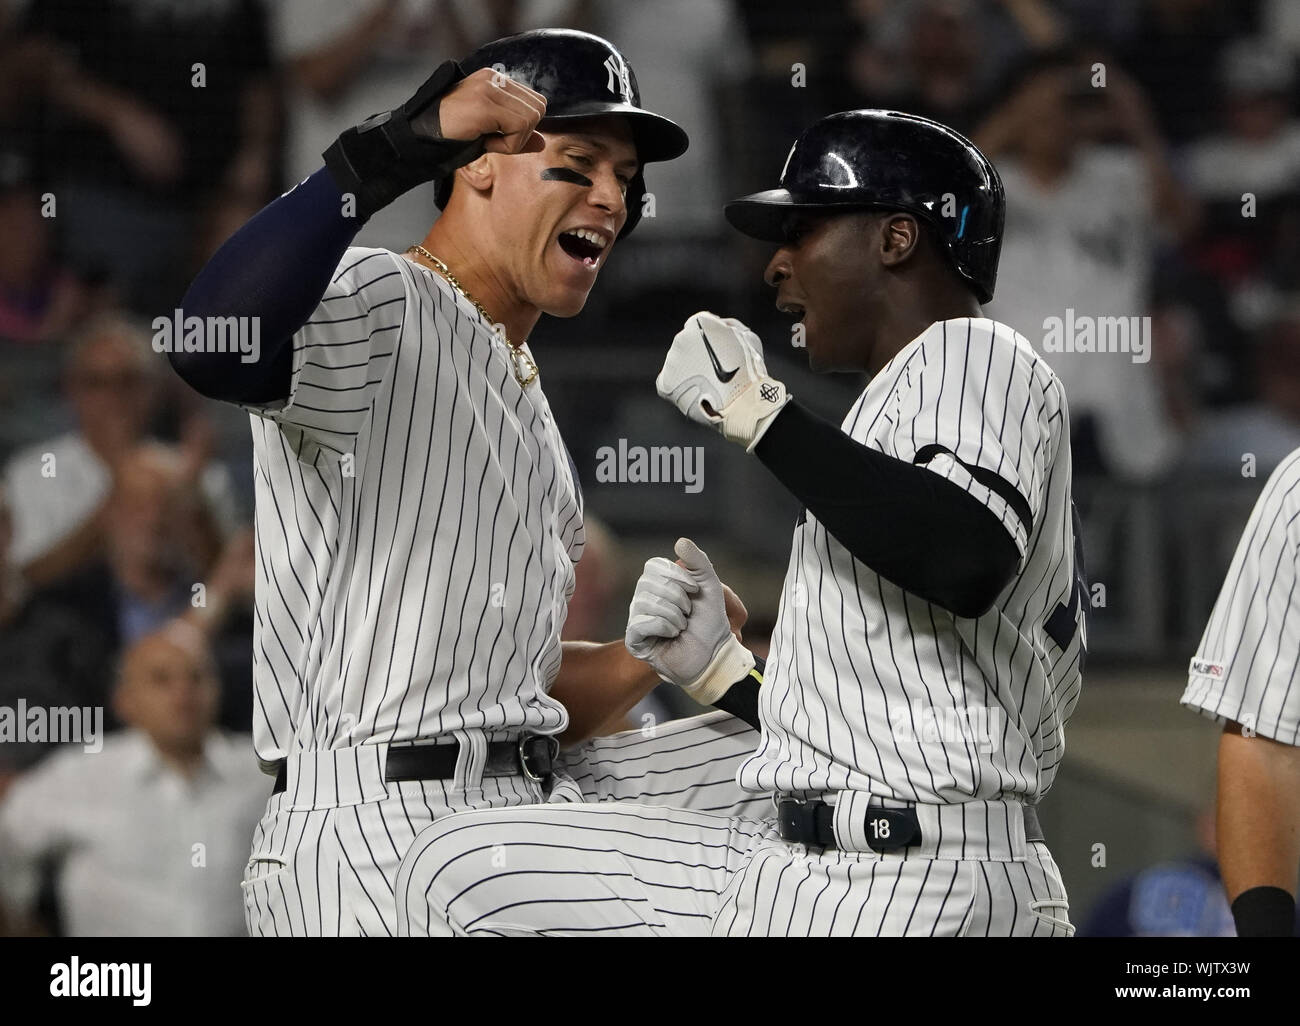 Bronx, United States. 03rd Sep, 2019. New York Yankees teammates Aaron Judge and Didi Gregorius celebrate at the plate after Gregorius' three-run home run against the Texas Rangers in the sixth inning at Yankee Stadium in New York City on Tuesday, September 3, 2019. Photo by Ray Stubblebine/UPI Credit: UPI/Alamy Live News Stock Photo